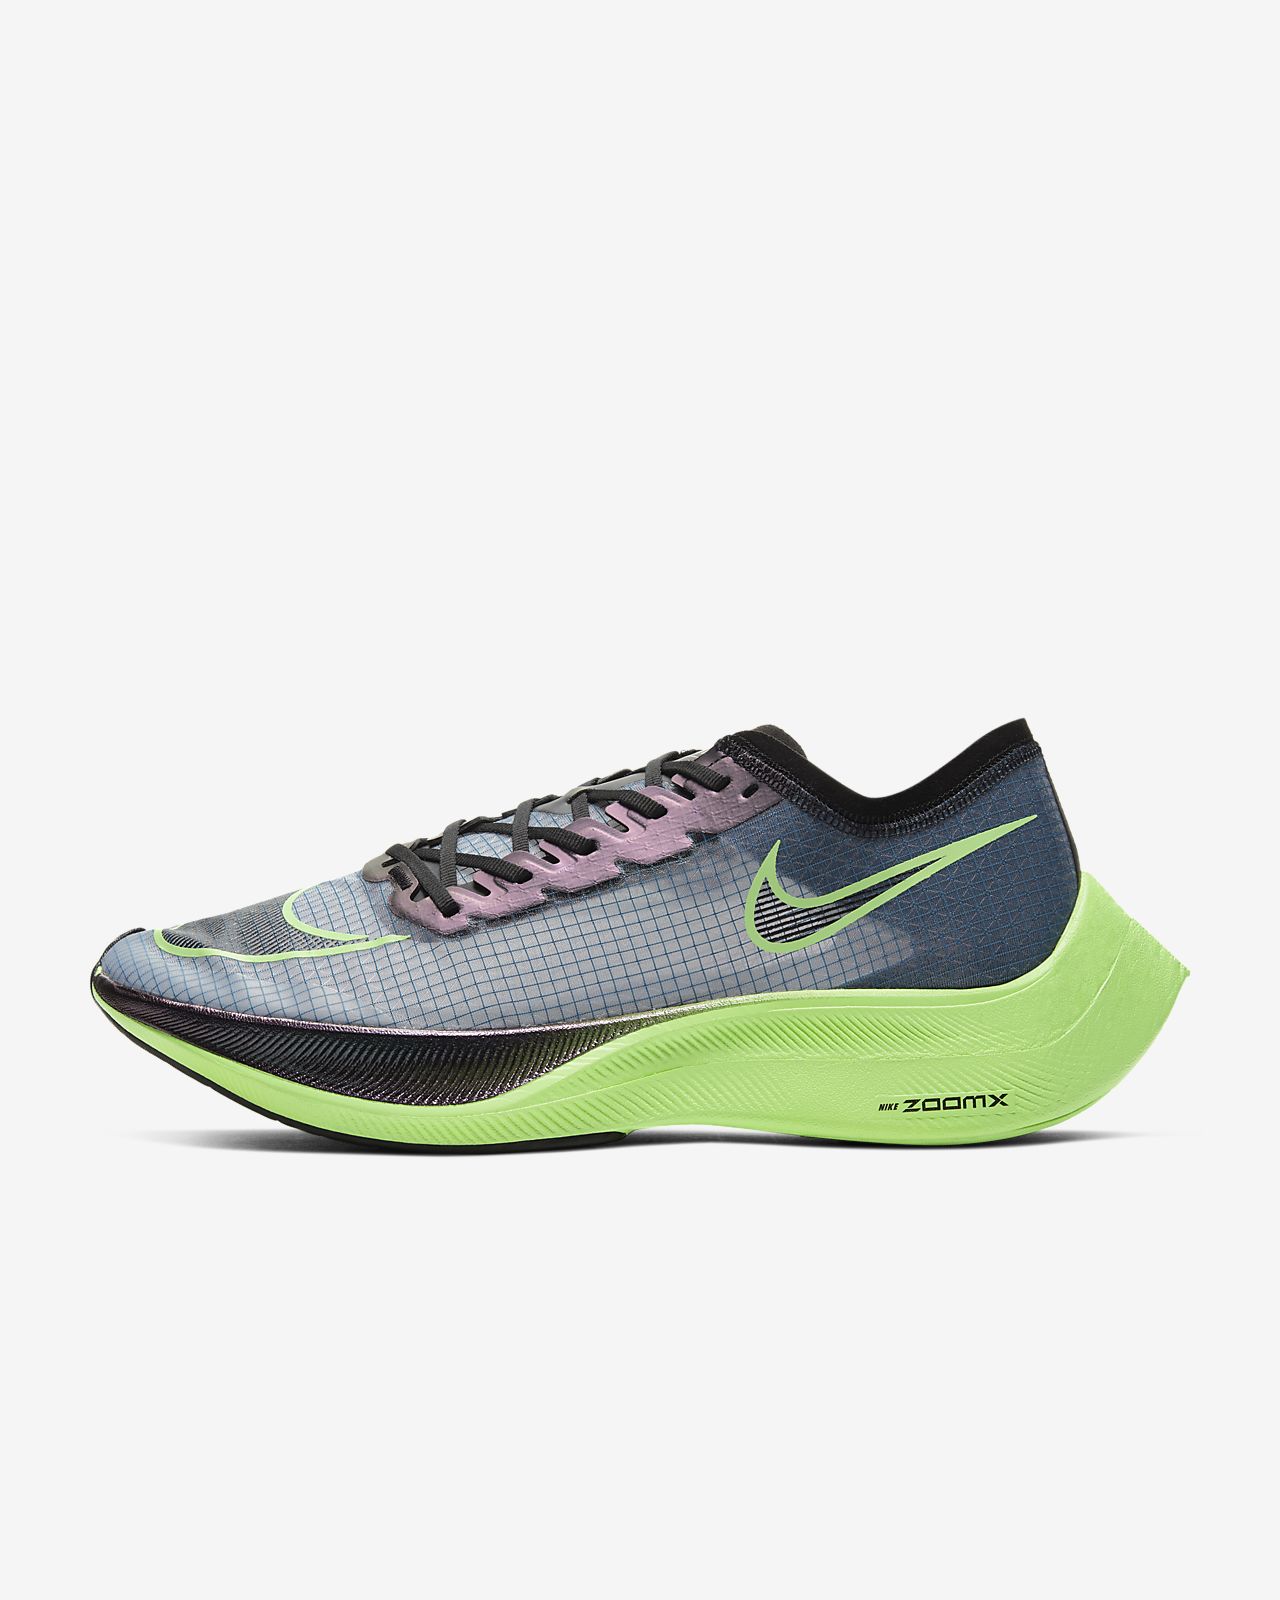 zoomx vaporfly next for sale 